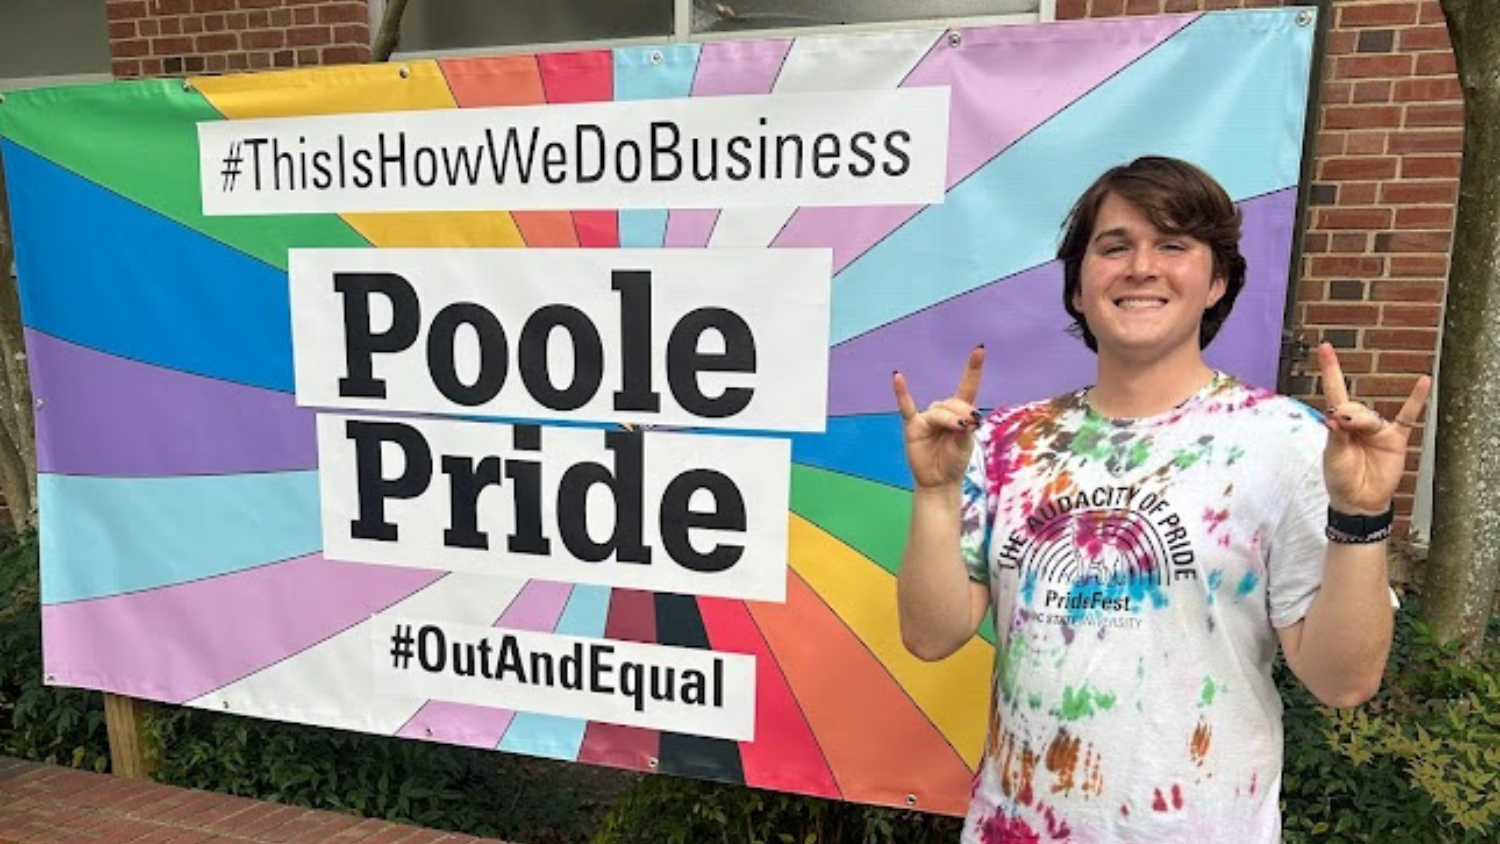 Queer Business Student Association Founder Colin Adams next to Poole pride banner.